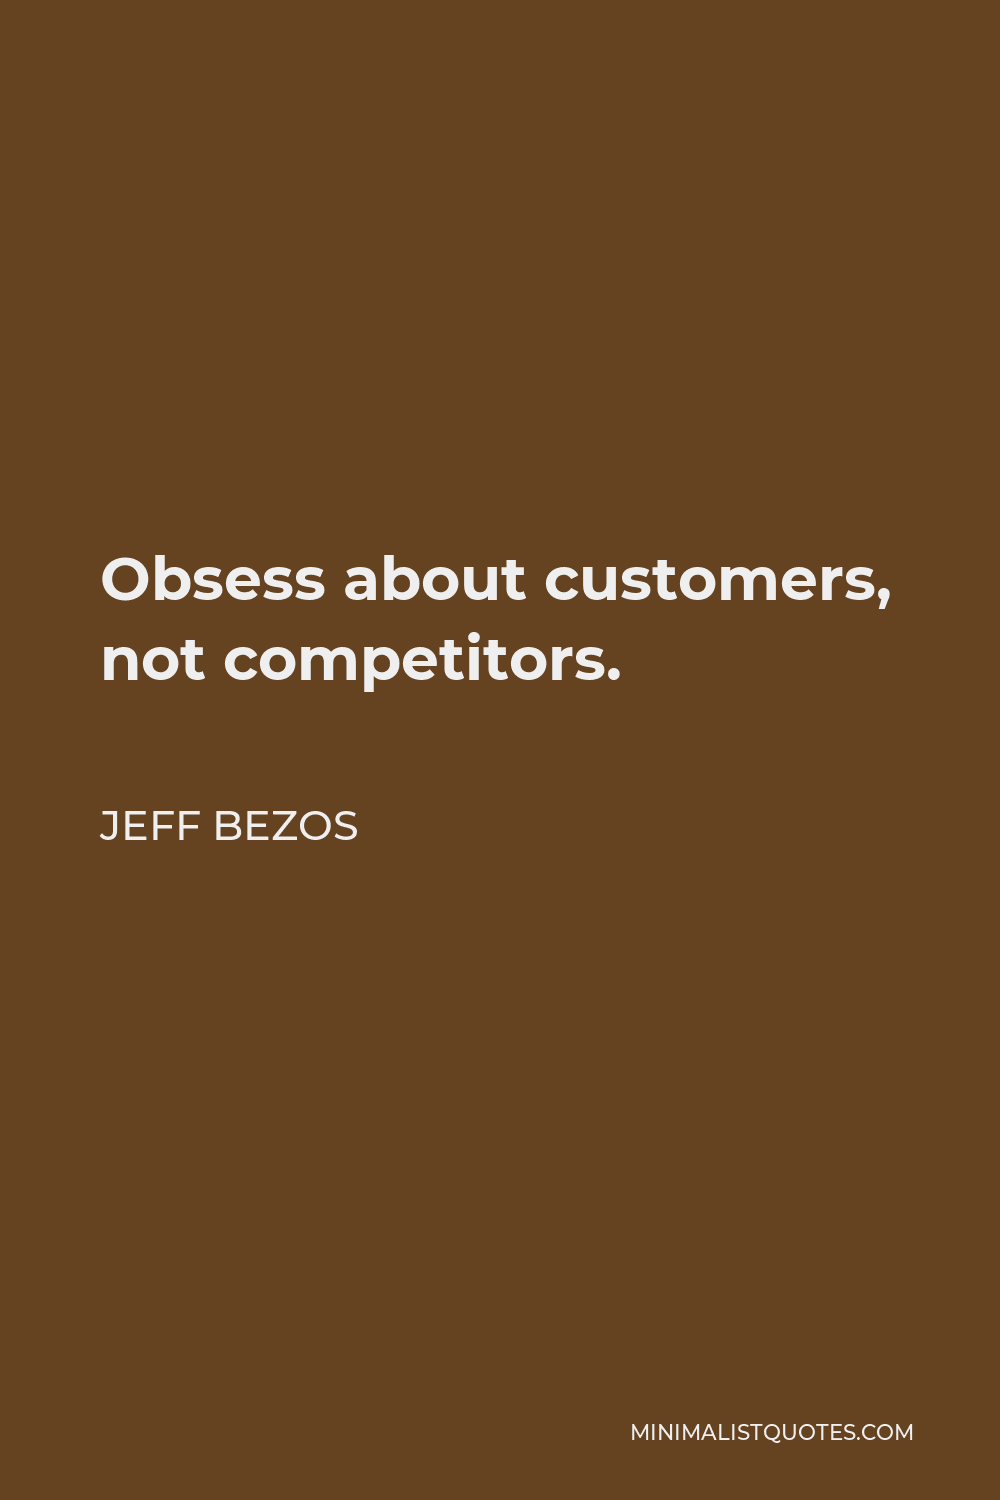 Jeff Bezos Quote - Obsess about customers, not competitors.